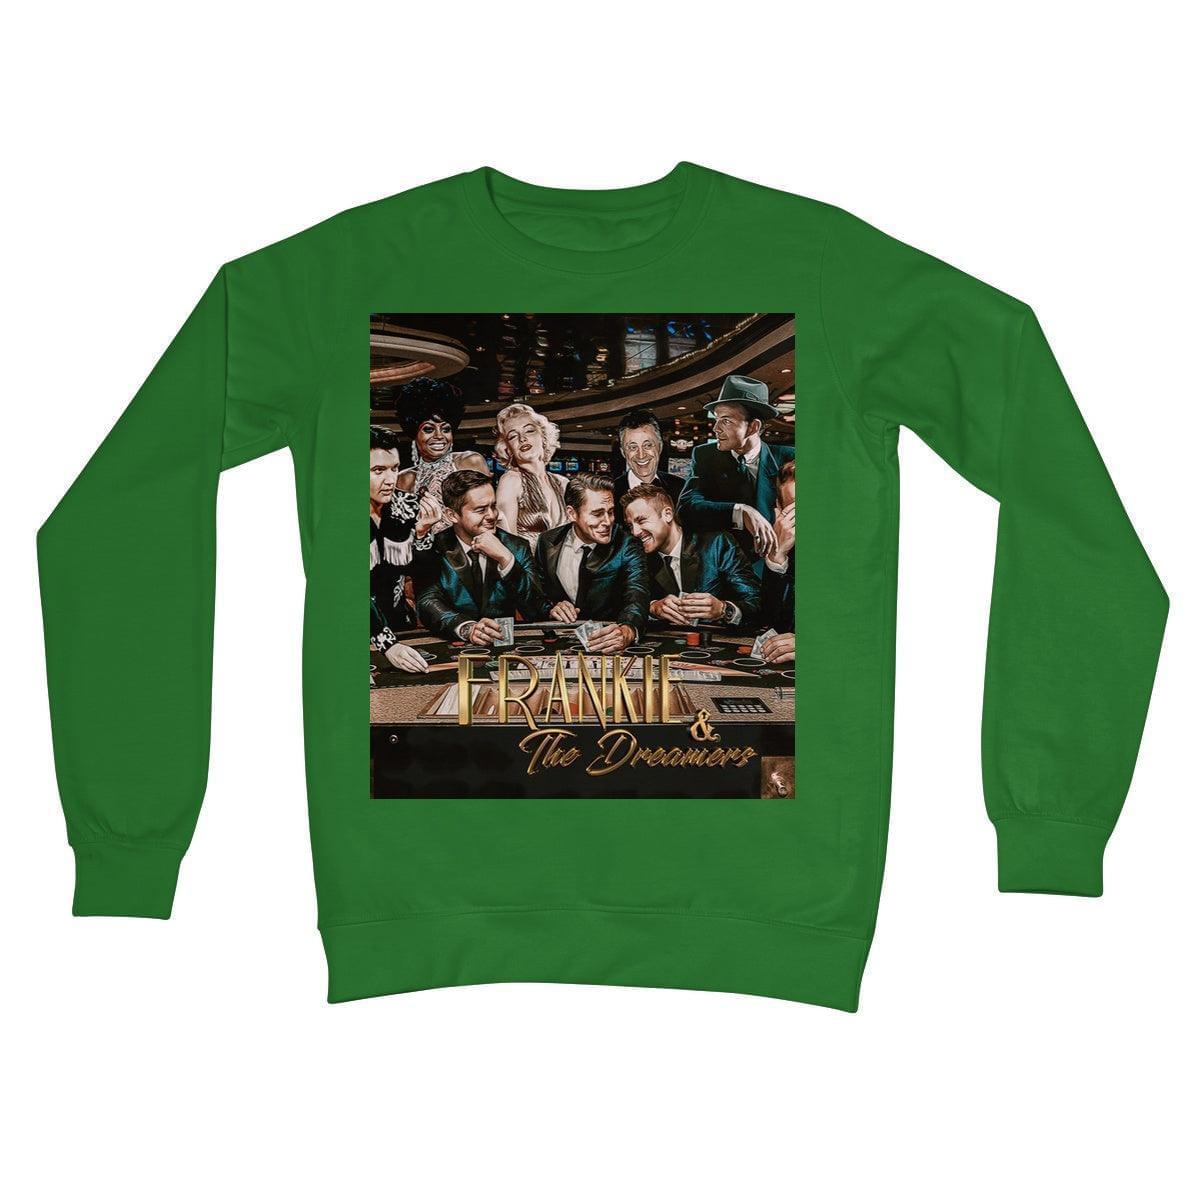 Frankie And The Dreamers Casino 2 Crew Neck Sweatshirt | Apparel Kelly Green